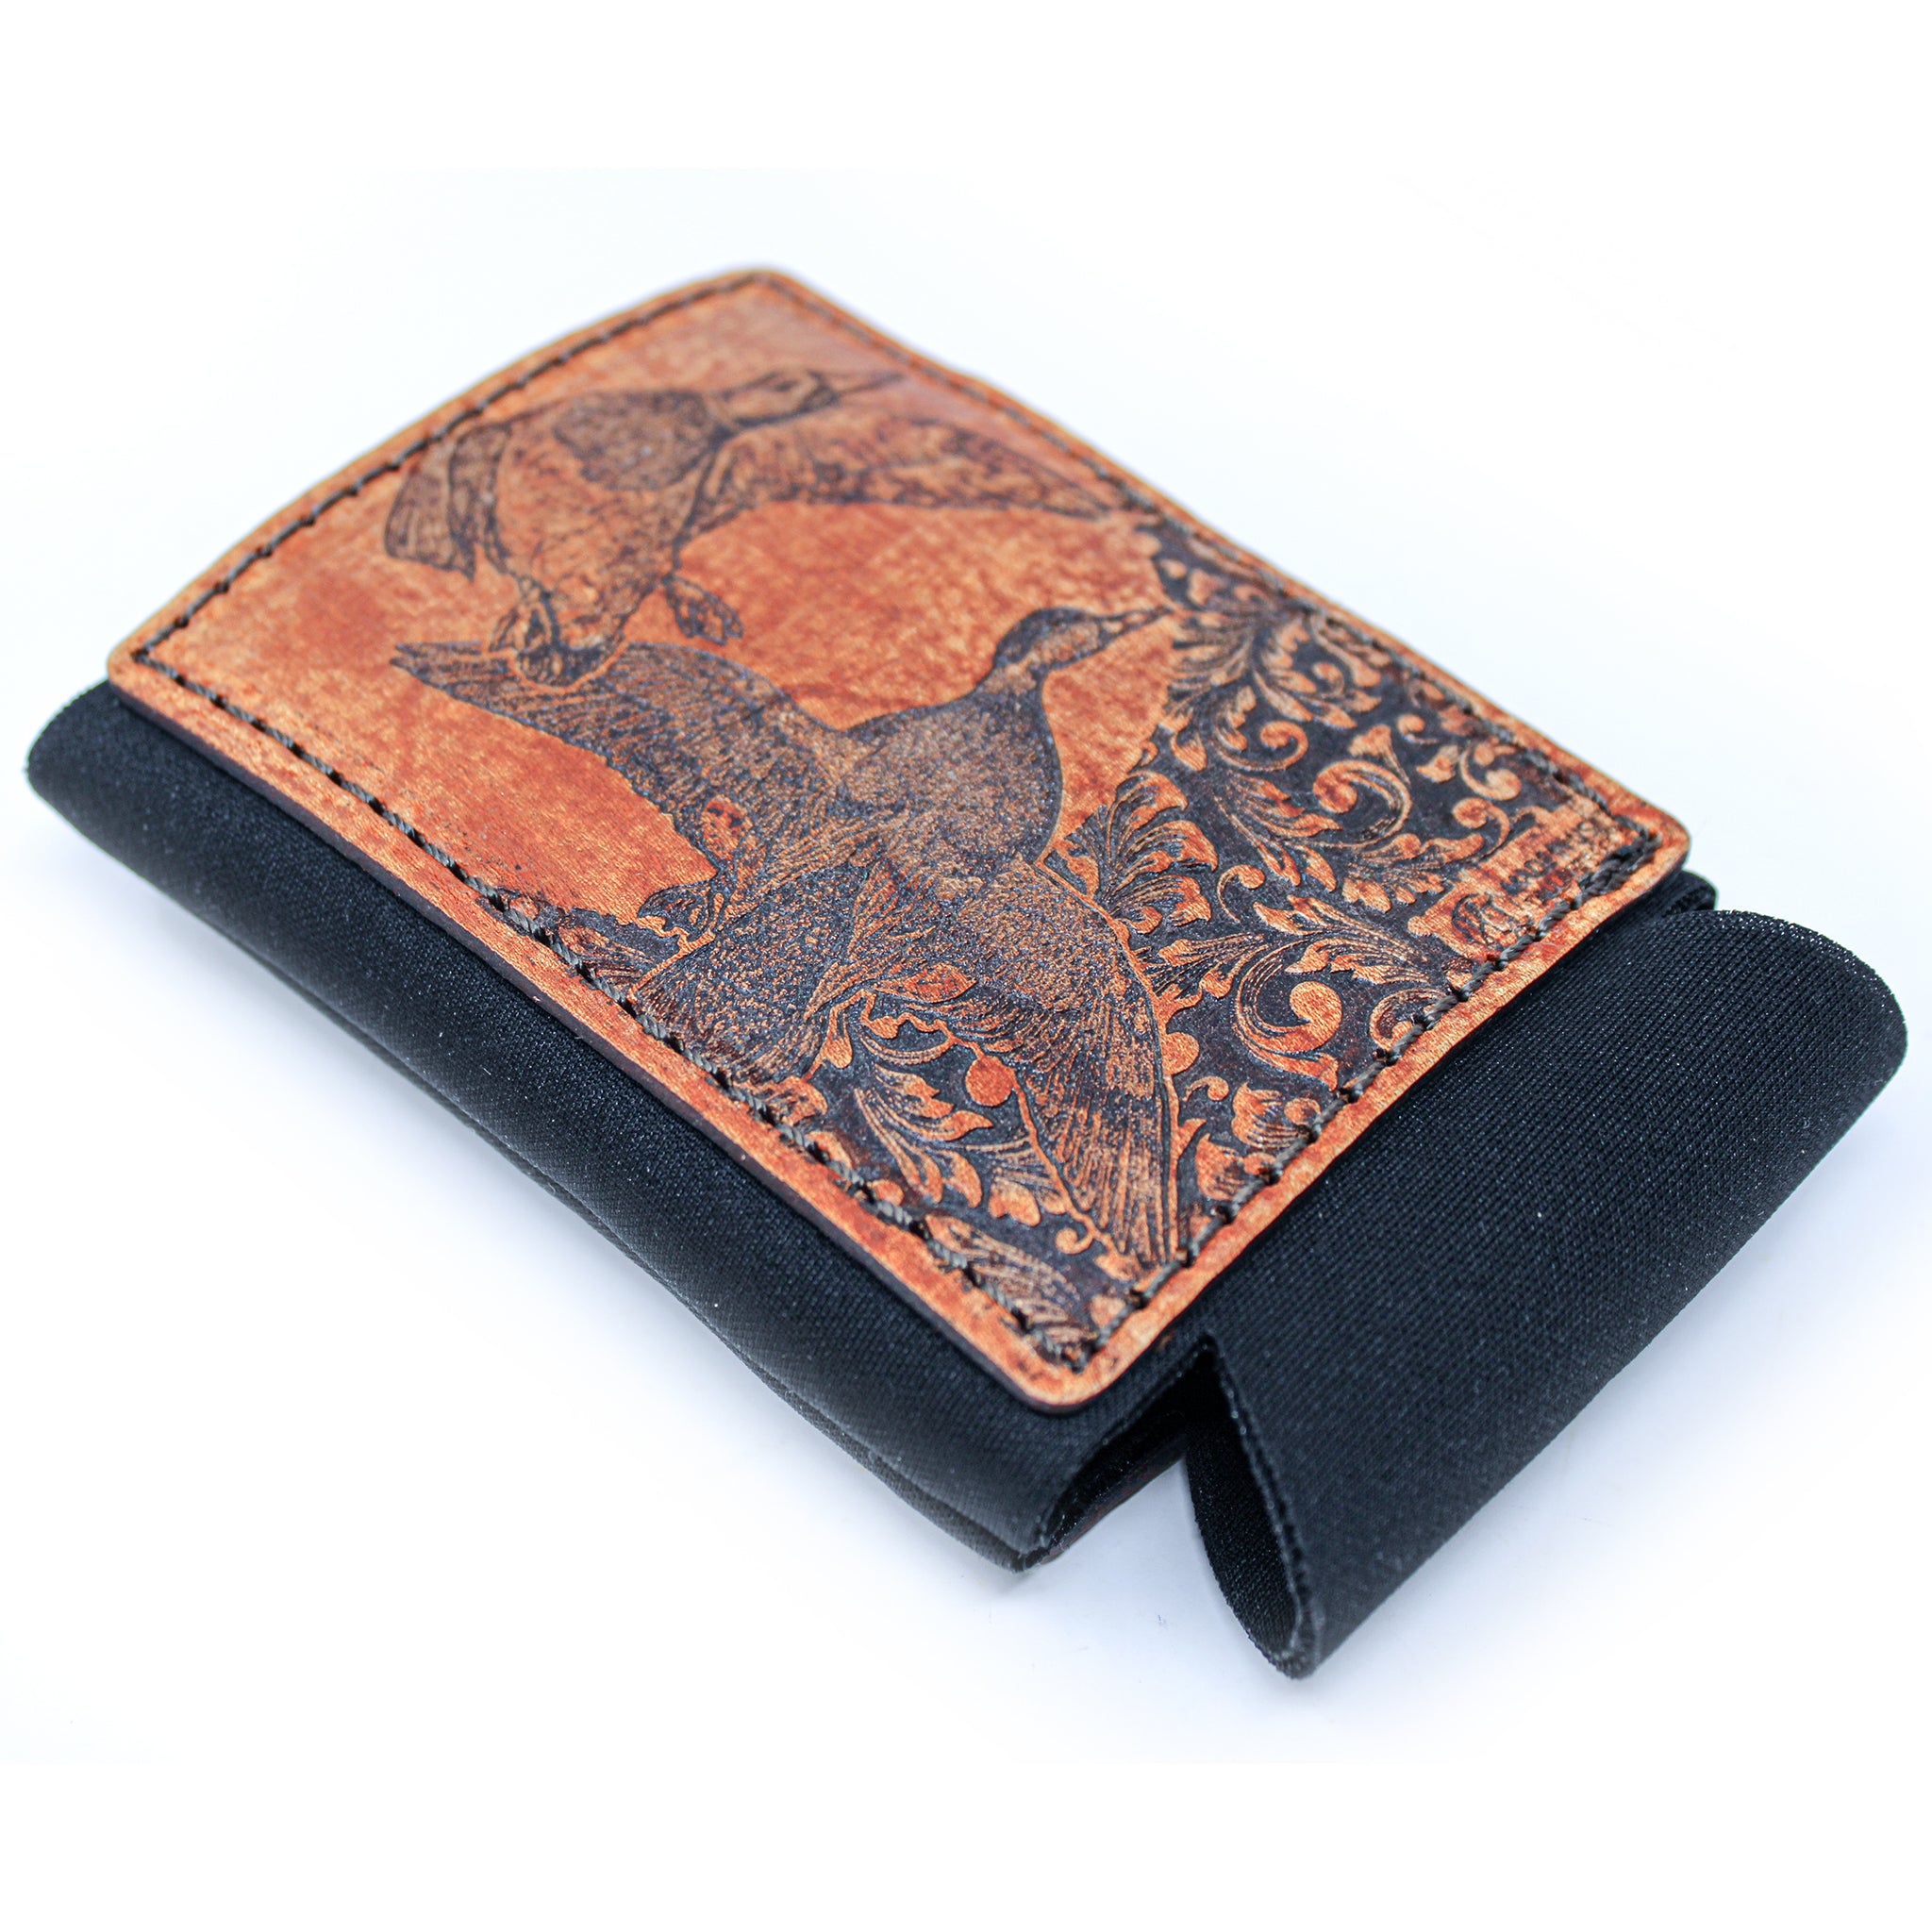 Leather Patch Drink Sleeve - Duck hunt